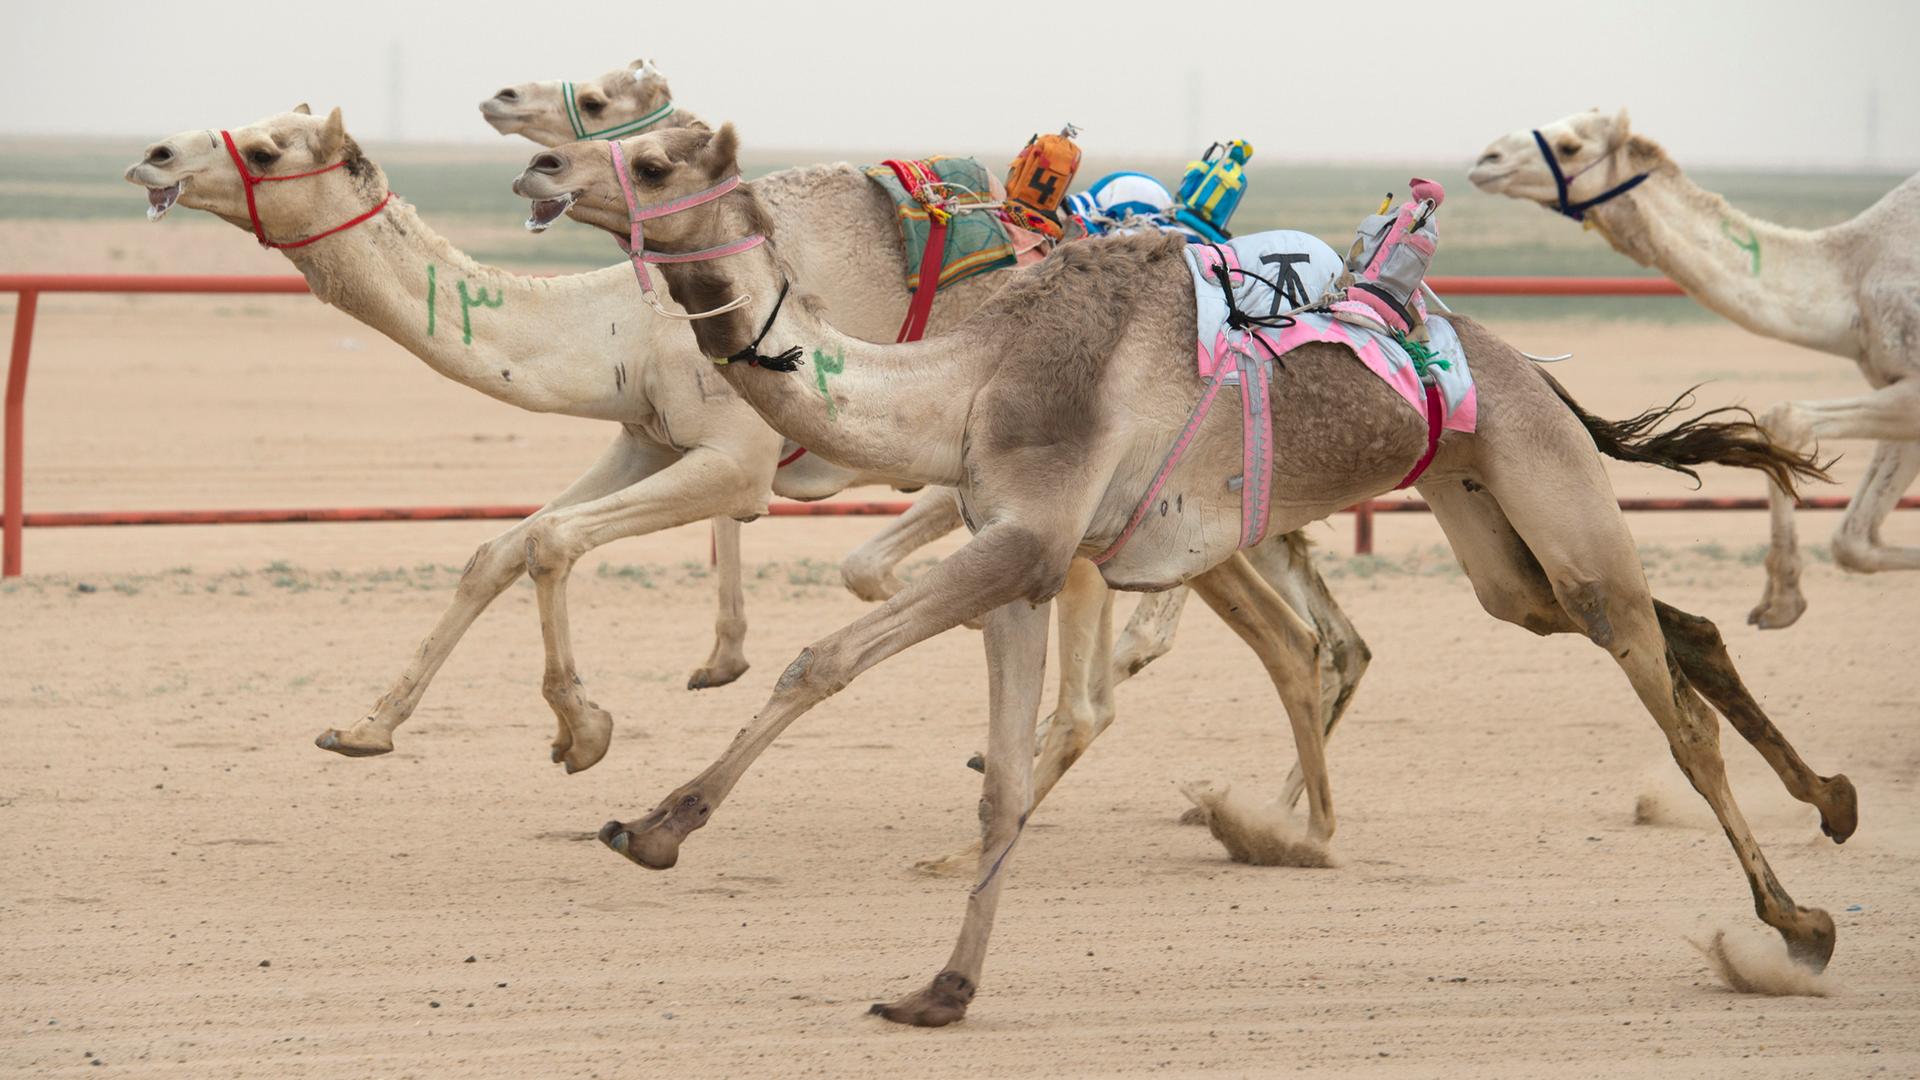 Camels ridden by robot jockeys compete during a weekly camel race at the Kuwait Camel Racing club in Kebd January 26, 2013. The robots are controlled by trainers, who follow in their vehicles around the track.